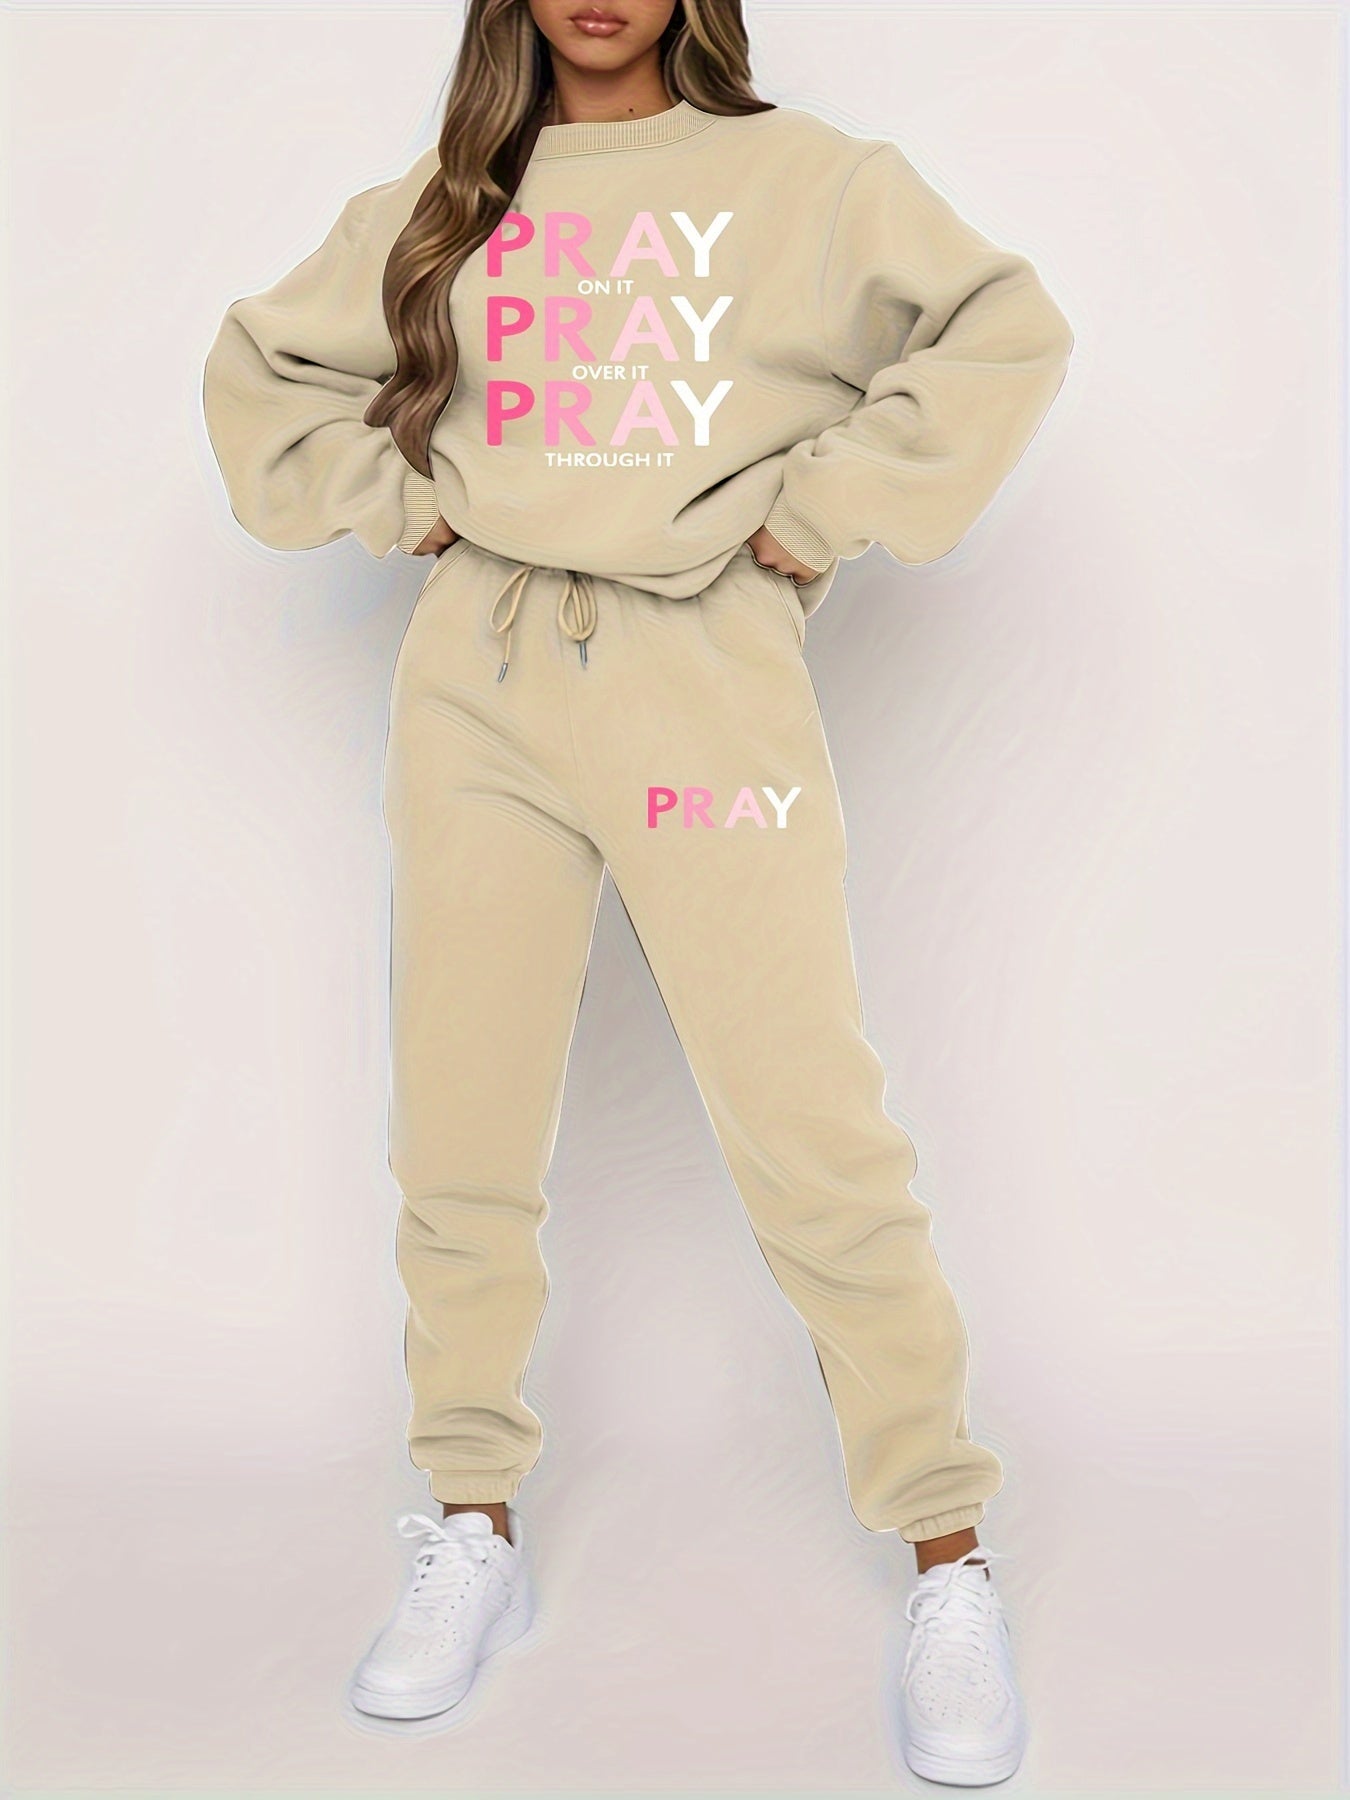 Pray On It, Over It, Through It Women's Christian Casual Outfit claimedbygoddesigns